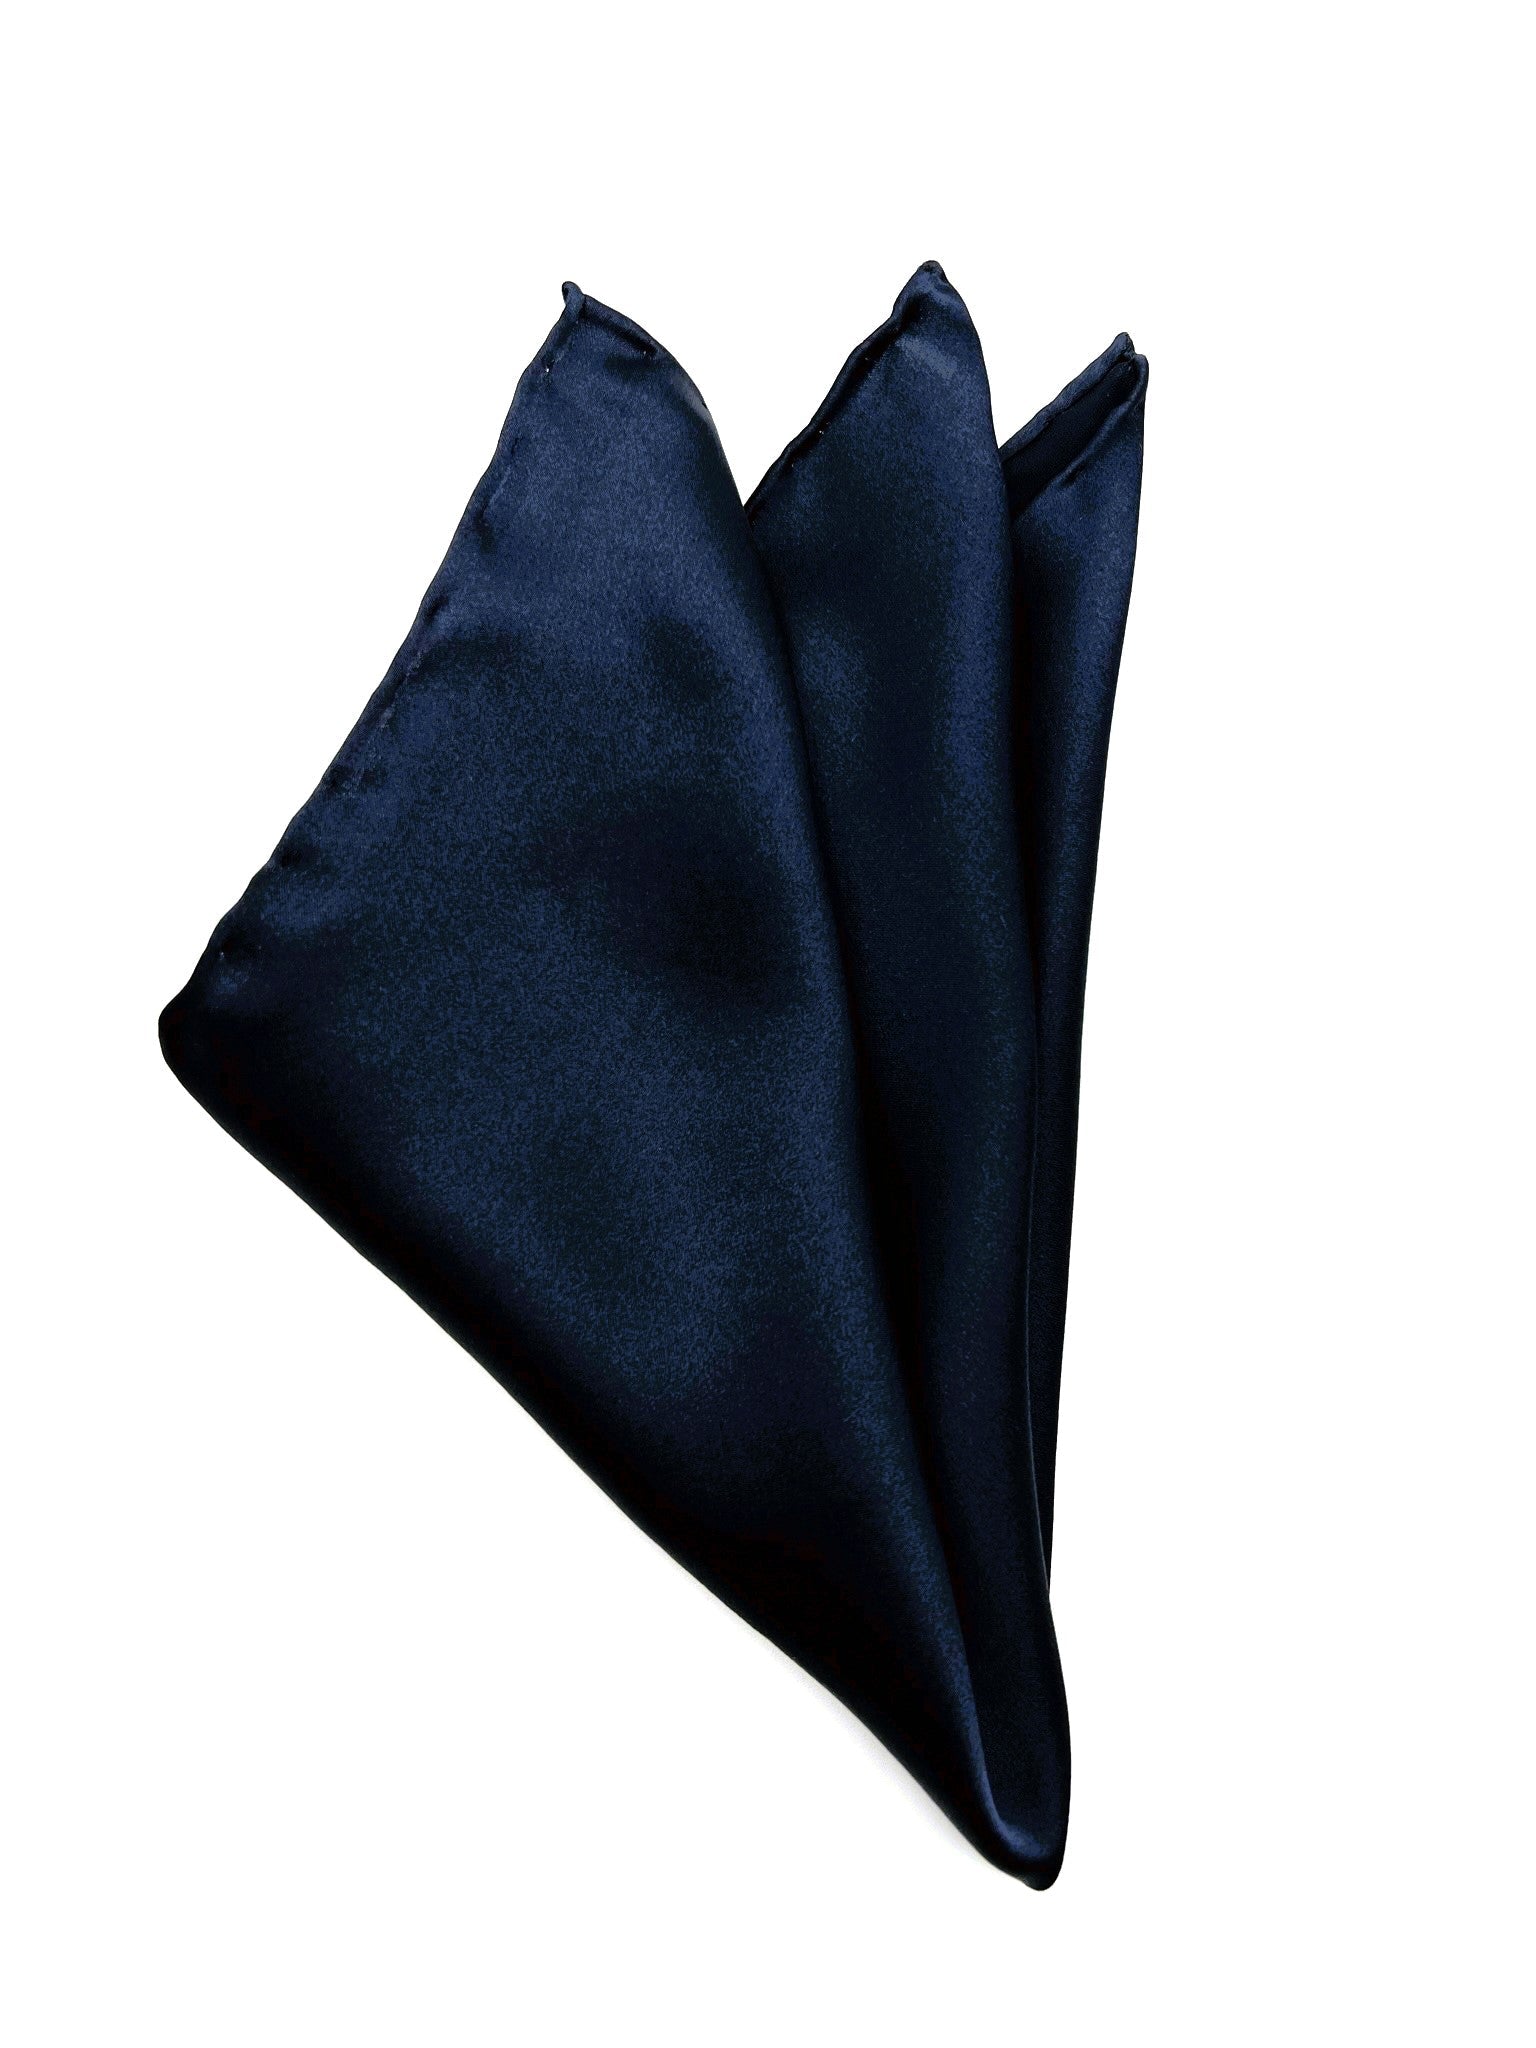 Navy Blue Silk Pocket Square. Handmade in Italy. Pocket Square in 100% pure Italian silk,  hand-finished edges. A must-have accessory for every  man's wardrobe that can suit either  a classic or sophisticated look.| Sartoria Dei Duchi - Atri